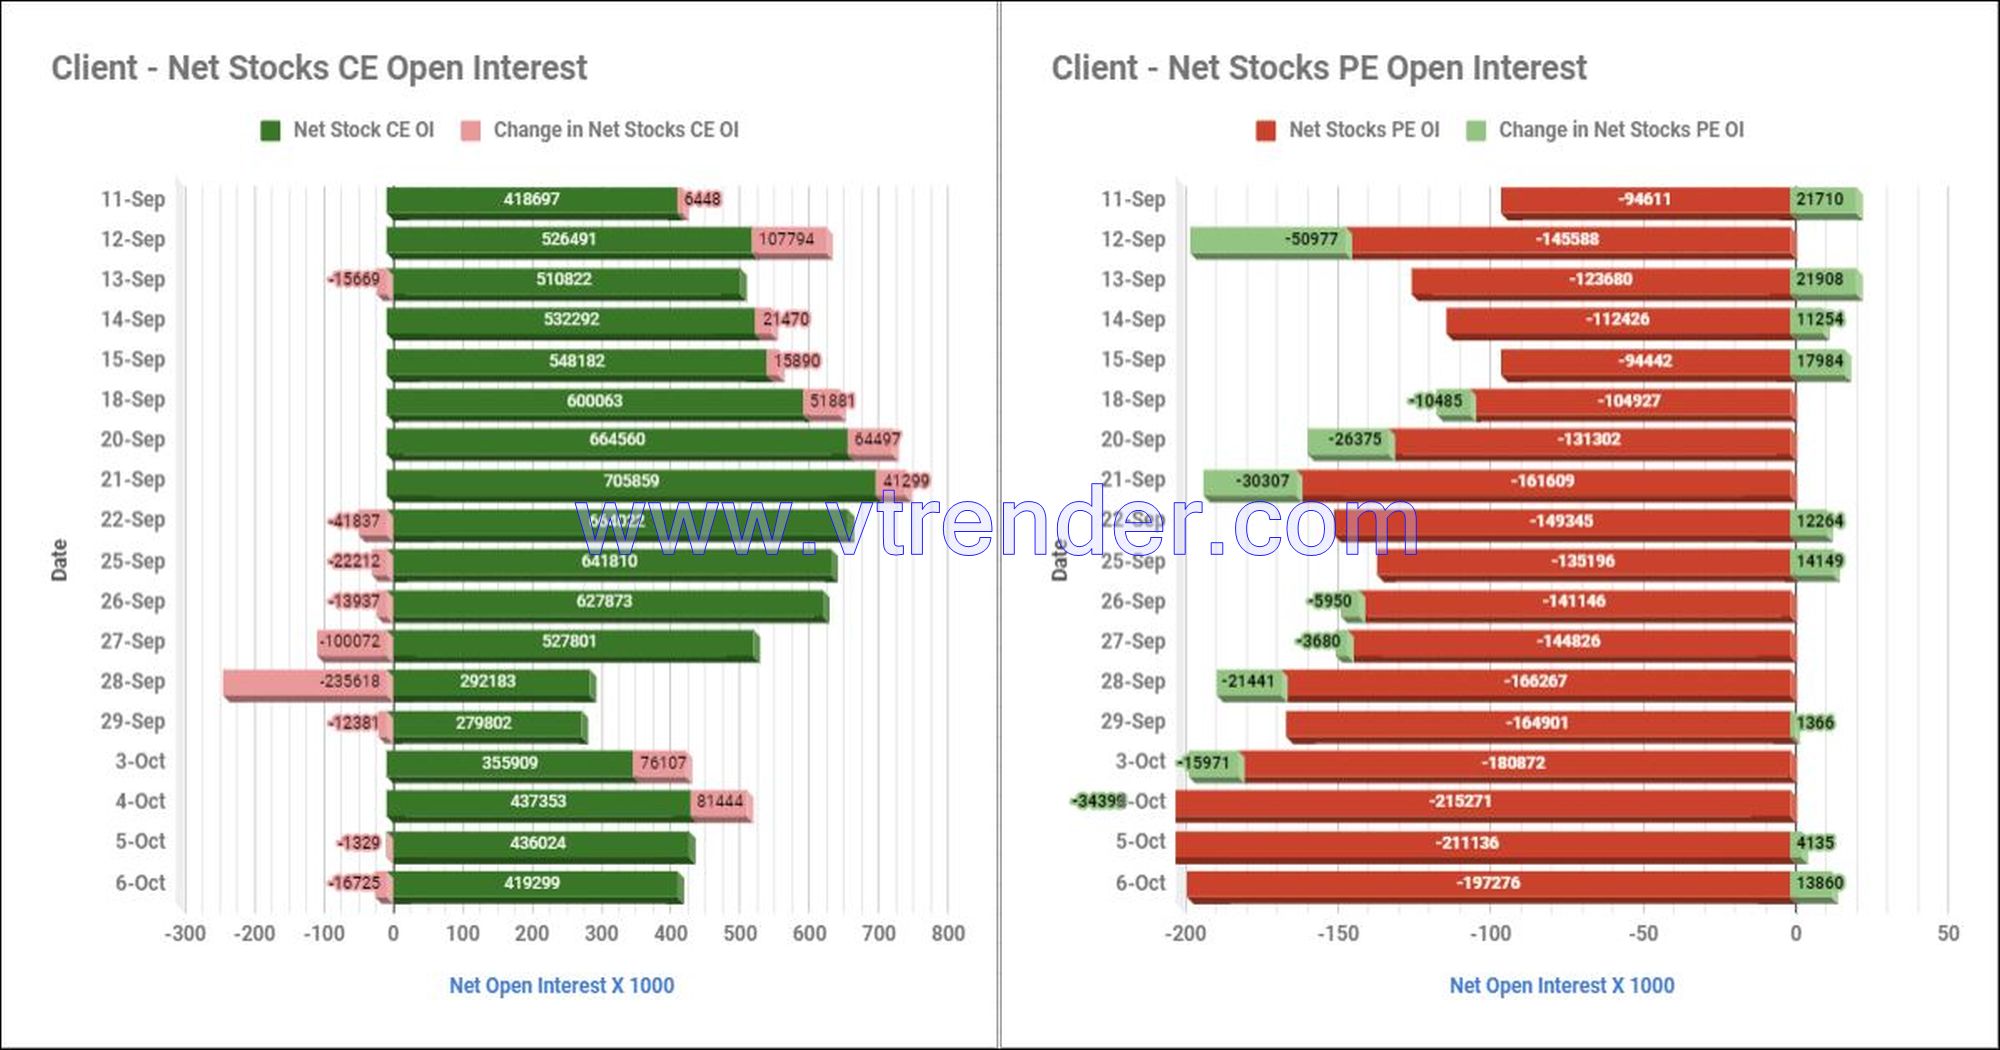 Clientstop06Oct Participantwise Net Open Interest And Net Equity Investments – 6Th Oct 2023 Ce, Client, Dii, Fii, Index Futures, Index Options, Open Interest, Pe, Prop, Stocks Futures